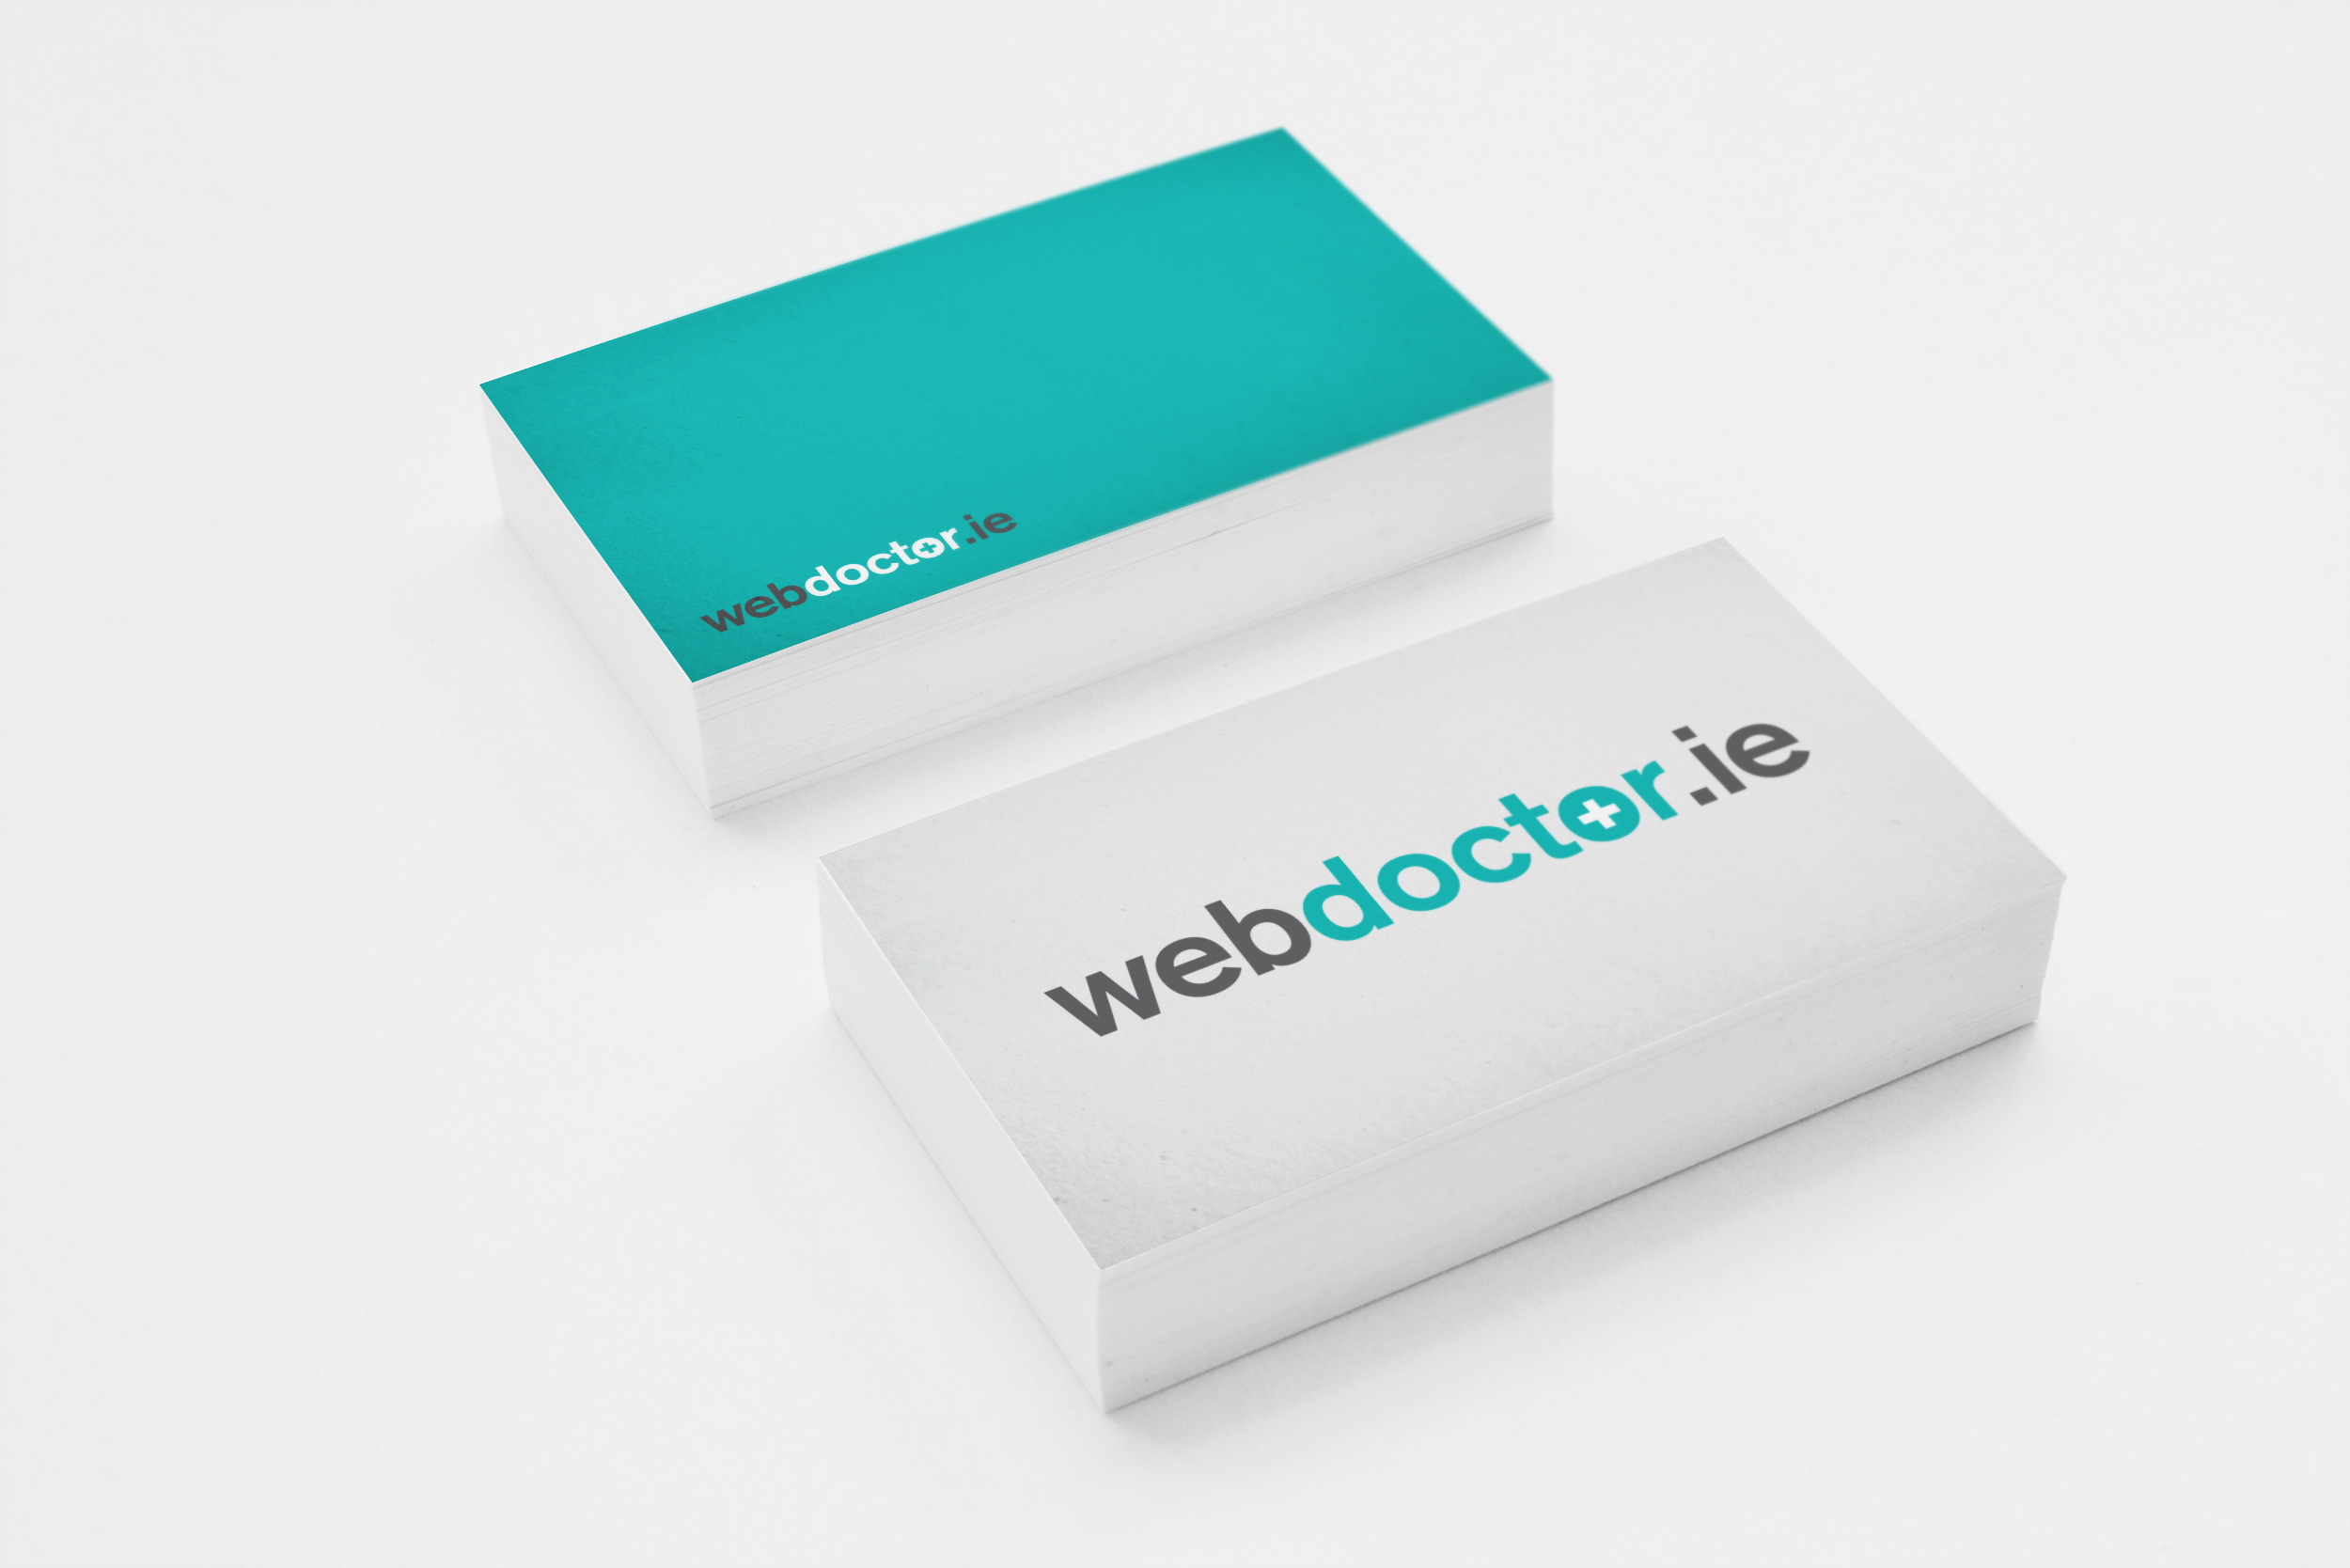 web_doctor_bus_cardsx2